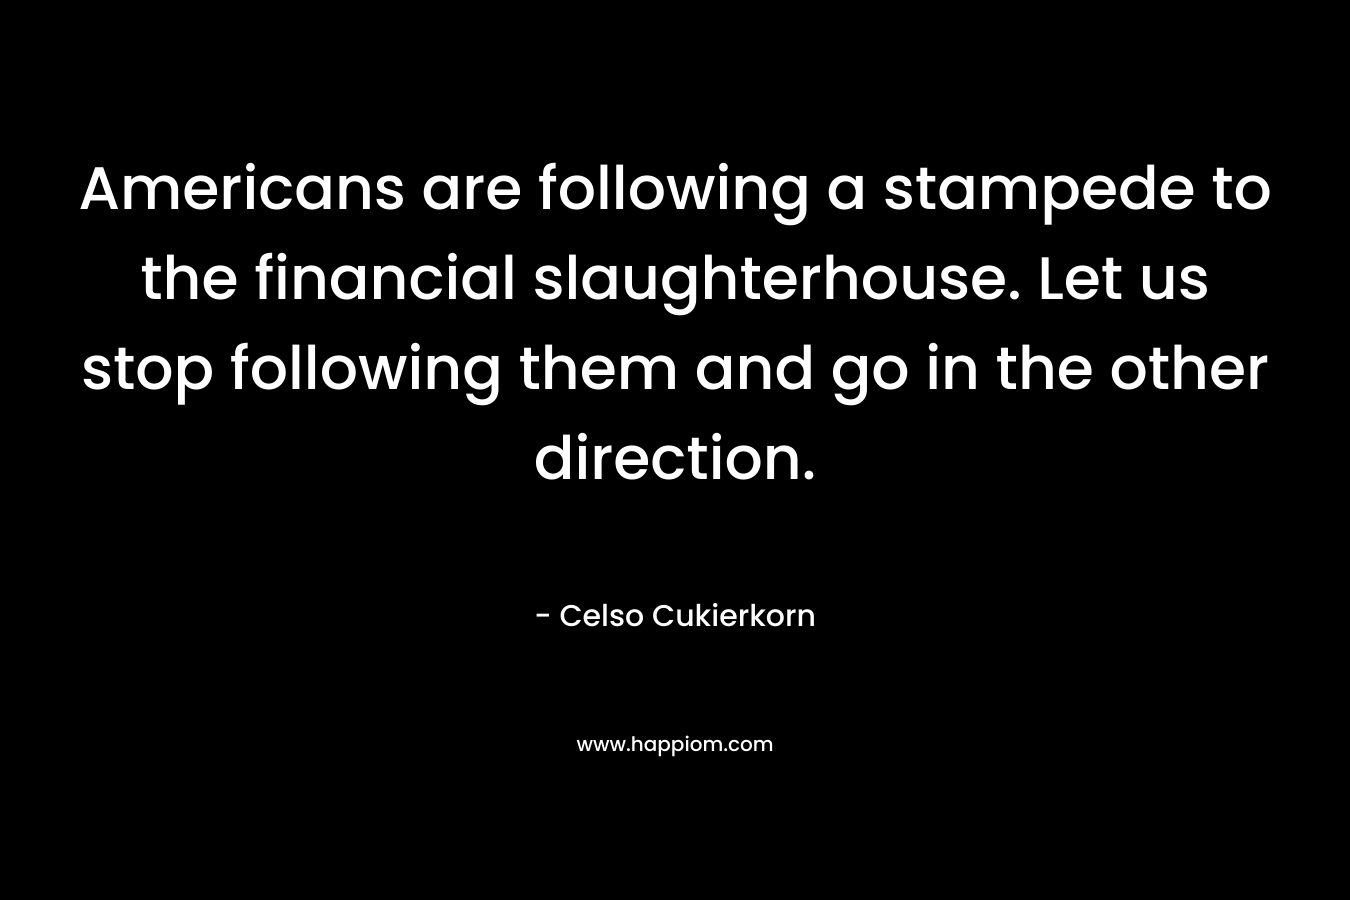 Americans are following a stampede to the financial slaughterhouse. Let us stop following them and go in the other direction.